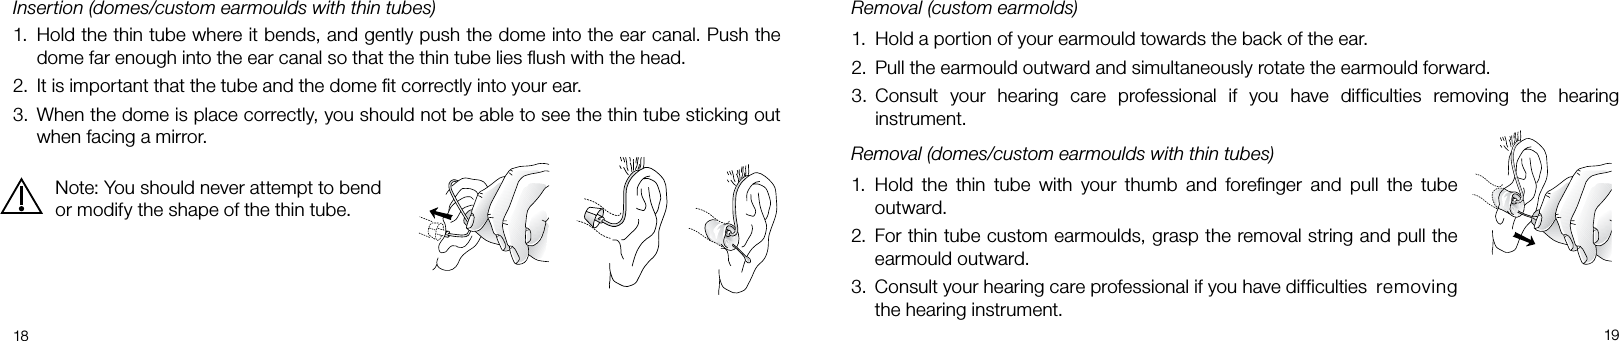  1819Removal (custom earmolds)Hold a portion of your earmould towards the back of the ear.1. Pull the earmould outward and simultaneously rotate the earmould forward.2. Consult  your  hearing  care  professional  if  you  have  difﬁculties  removing  the  hearing 3. instrument.Removal (domes/custom earmoulds with thin tubes)Hold  the  thin  tube  with  your  thumb  and  foreﬁnger  and  pull  the  tube 1. outward.For thin tube custom earmoulds, grasp the removal string and pull the 2. earmould outward.Consult your hearing care professional if you have difficulties  removing 3. the hearing instrument.Insertion (domes/custom earmoulds with thin tubes)Hold the thin tube where it bends, and gently push the dome into the ear canal. Push the 1. dome far enough into the ear canal so that the thin tube lies ﬂush with the head.It is important that the tube and the dome ﬁt correctly into your ear.2. When the dome is place correctly, you should not be able to see the thin tube sticking out 3. when facing a mirror.Note: You should never attempt to bend or modify the shape of the thin tube.